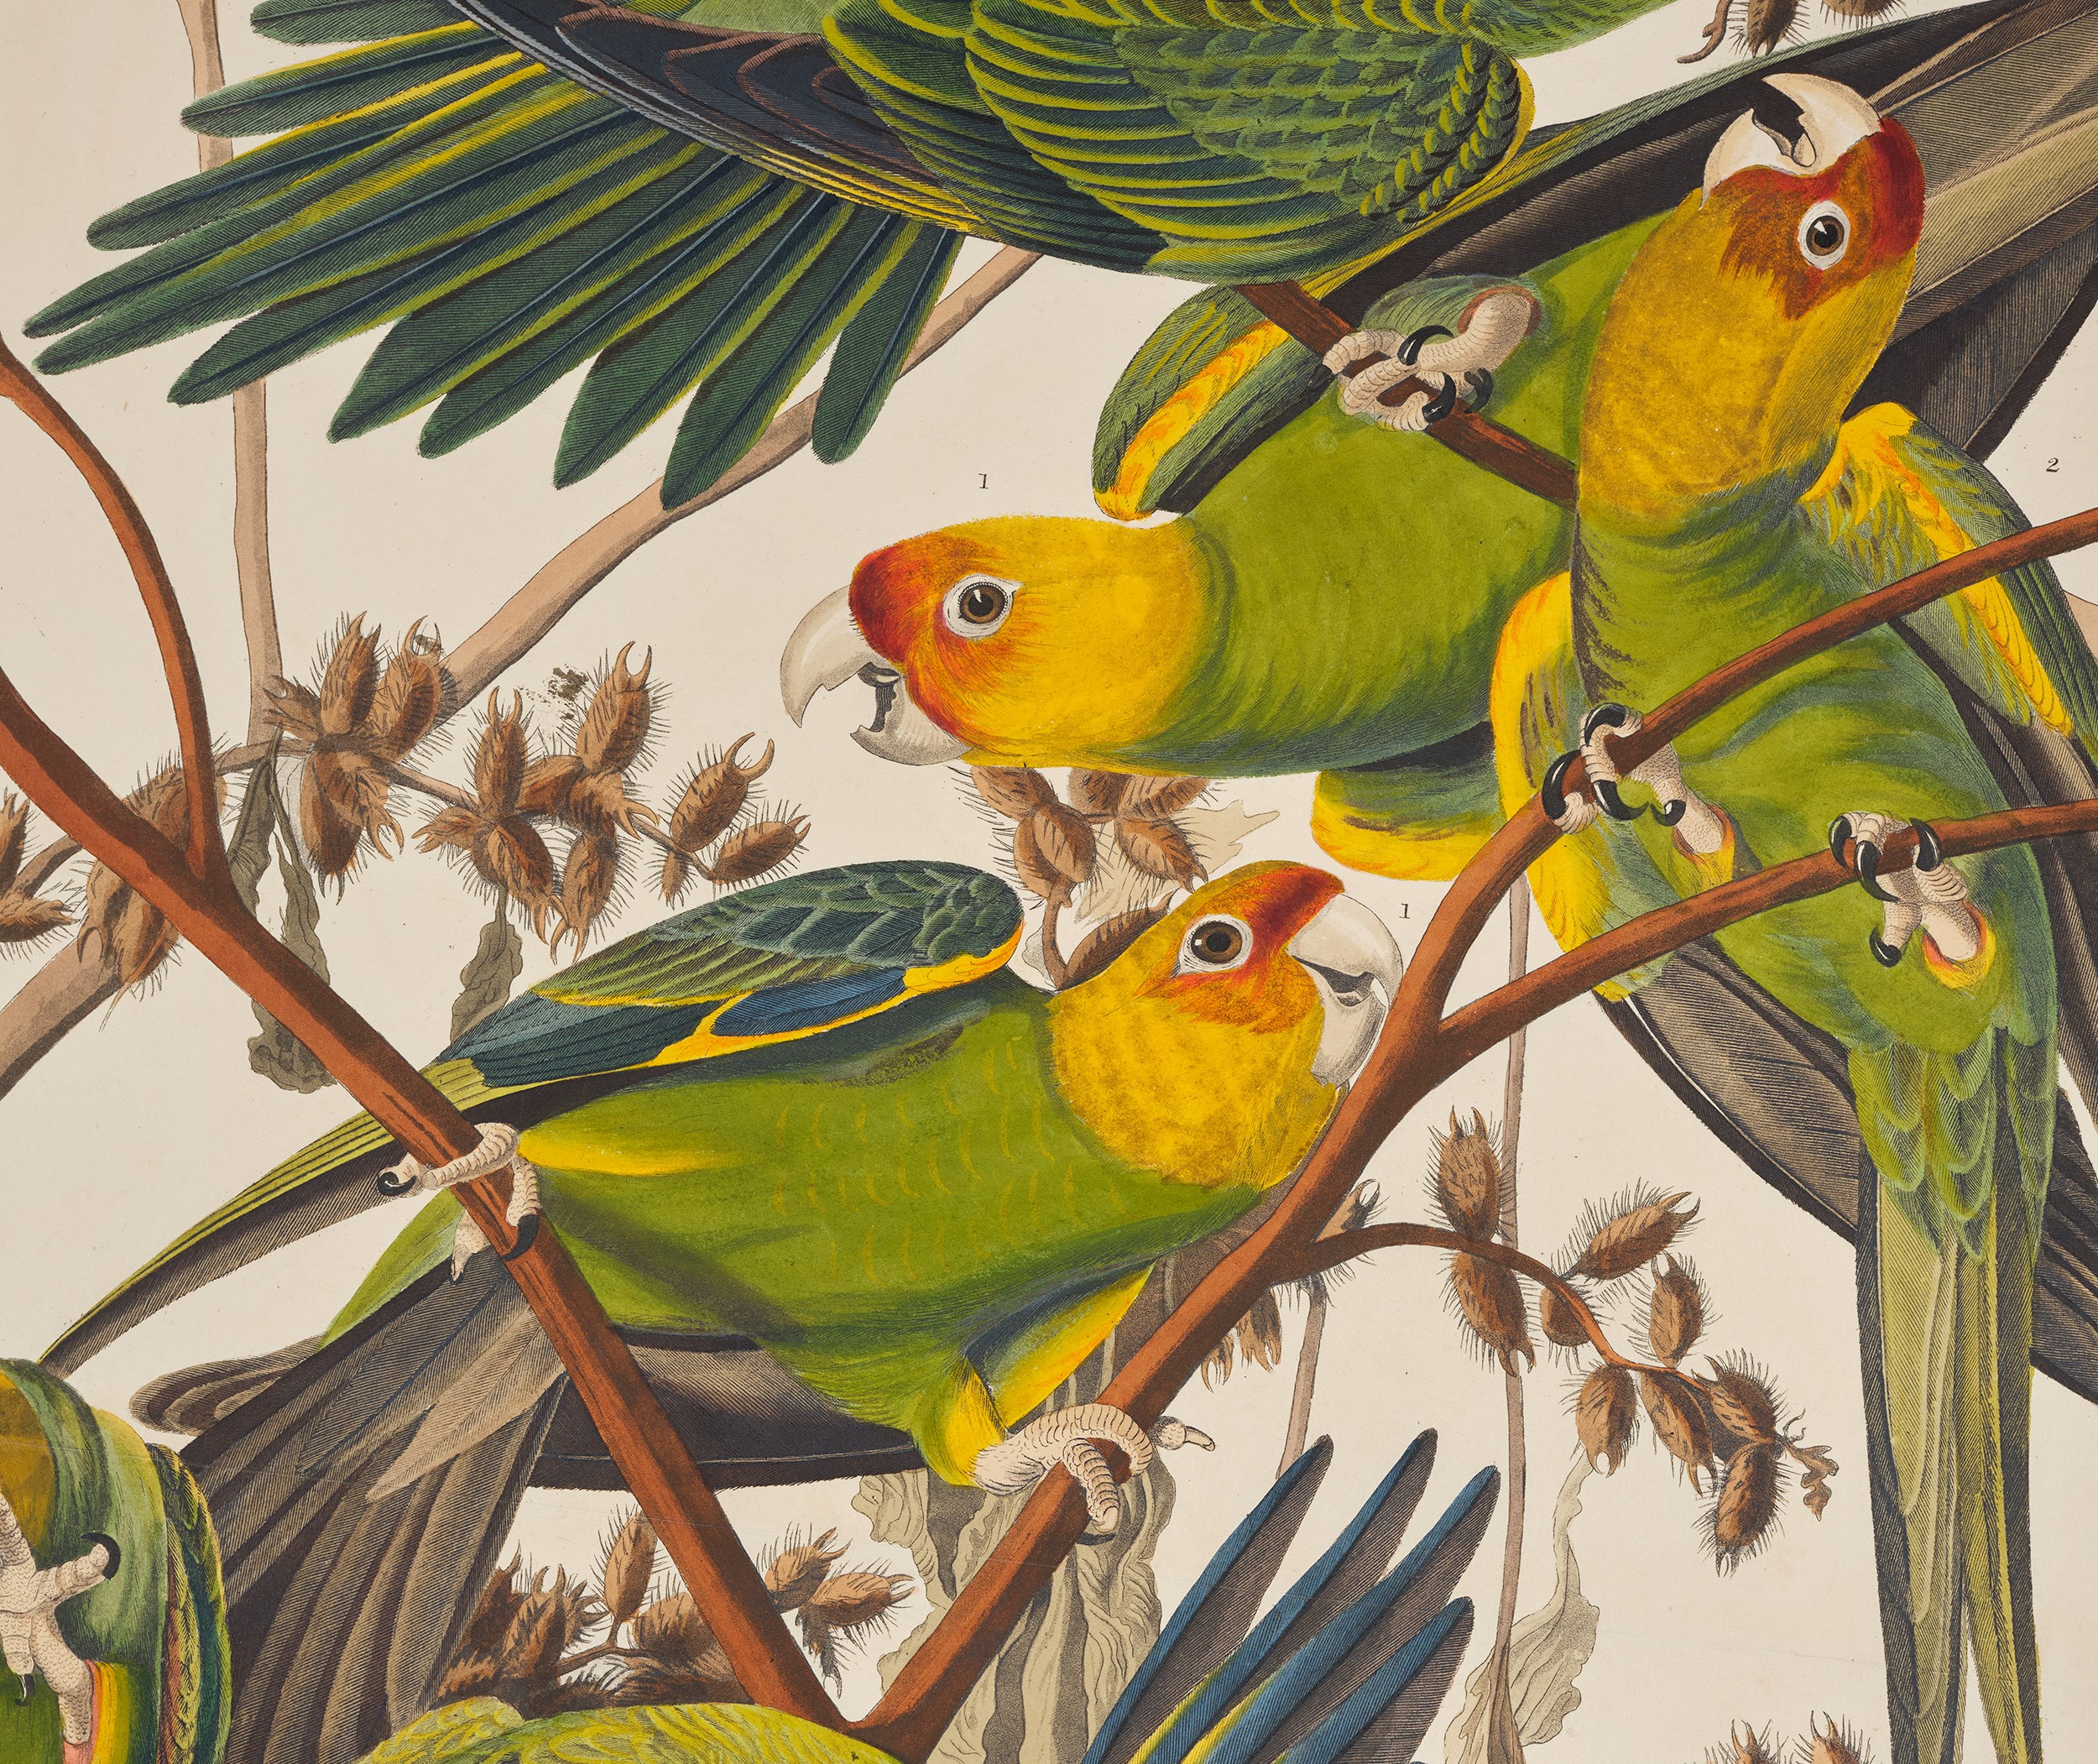 1.Detail From A Print Depicting Carolina Parrots From Birds Of America, By John James Audubon